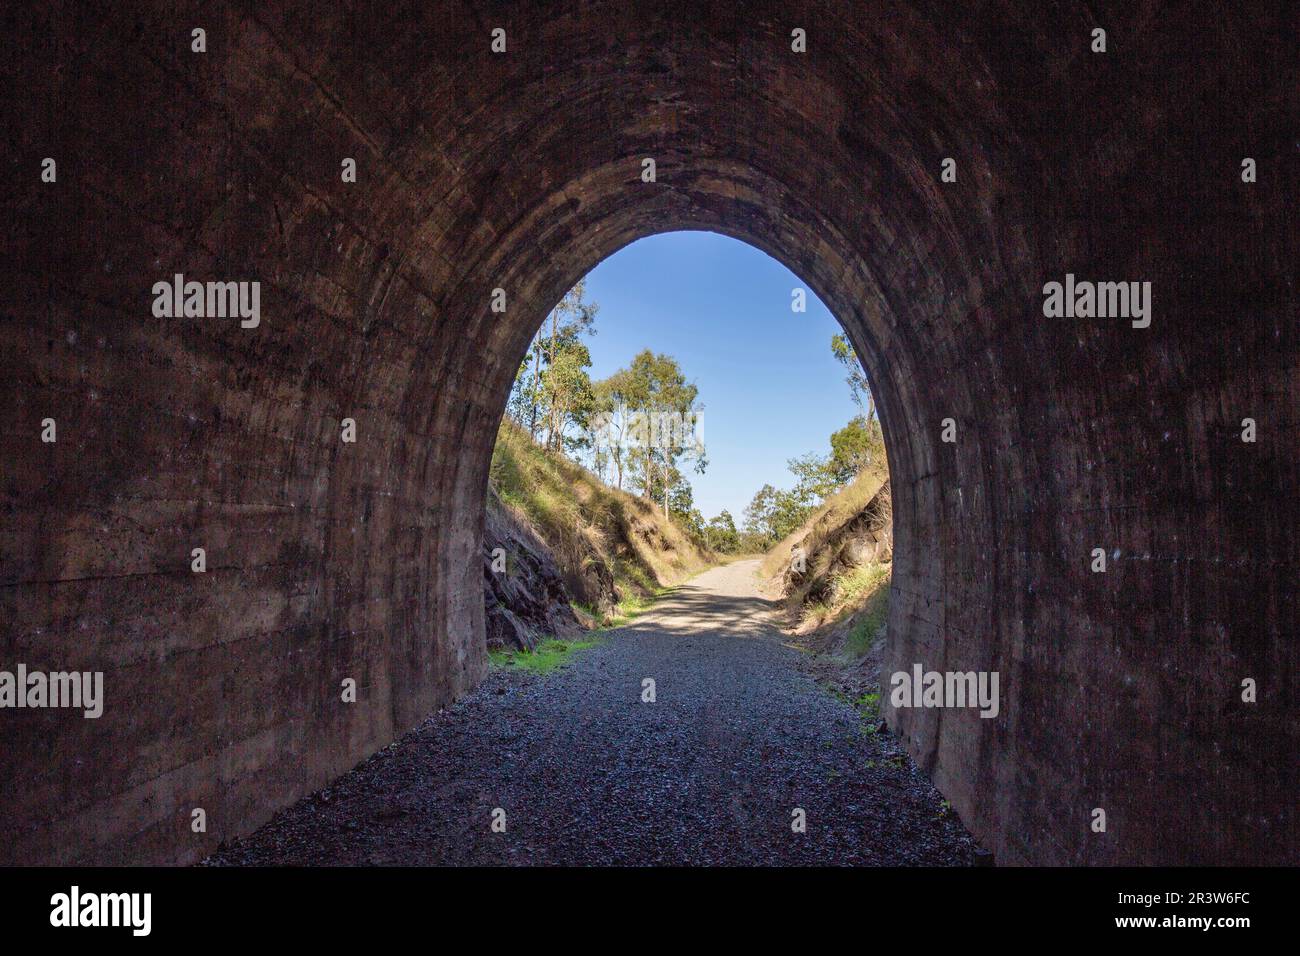 Yimbun Railway Tunnel, built from 1909 to 1910, is a concrete lined 100m straight tunnel in Harlin, Somerset Region, Queensland, Australia. Stock Photo